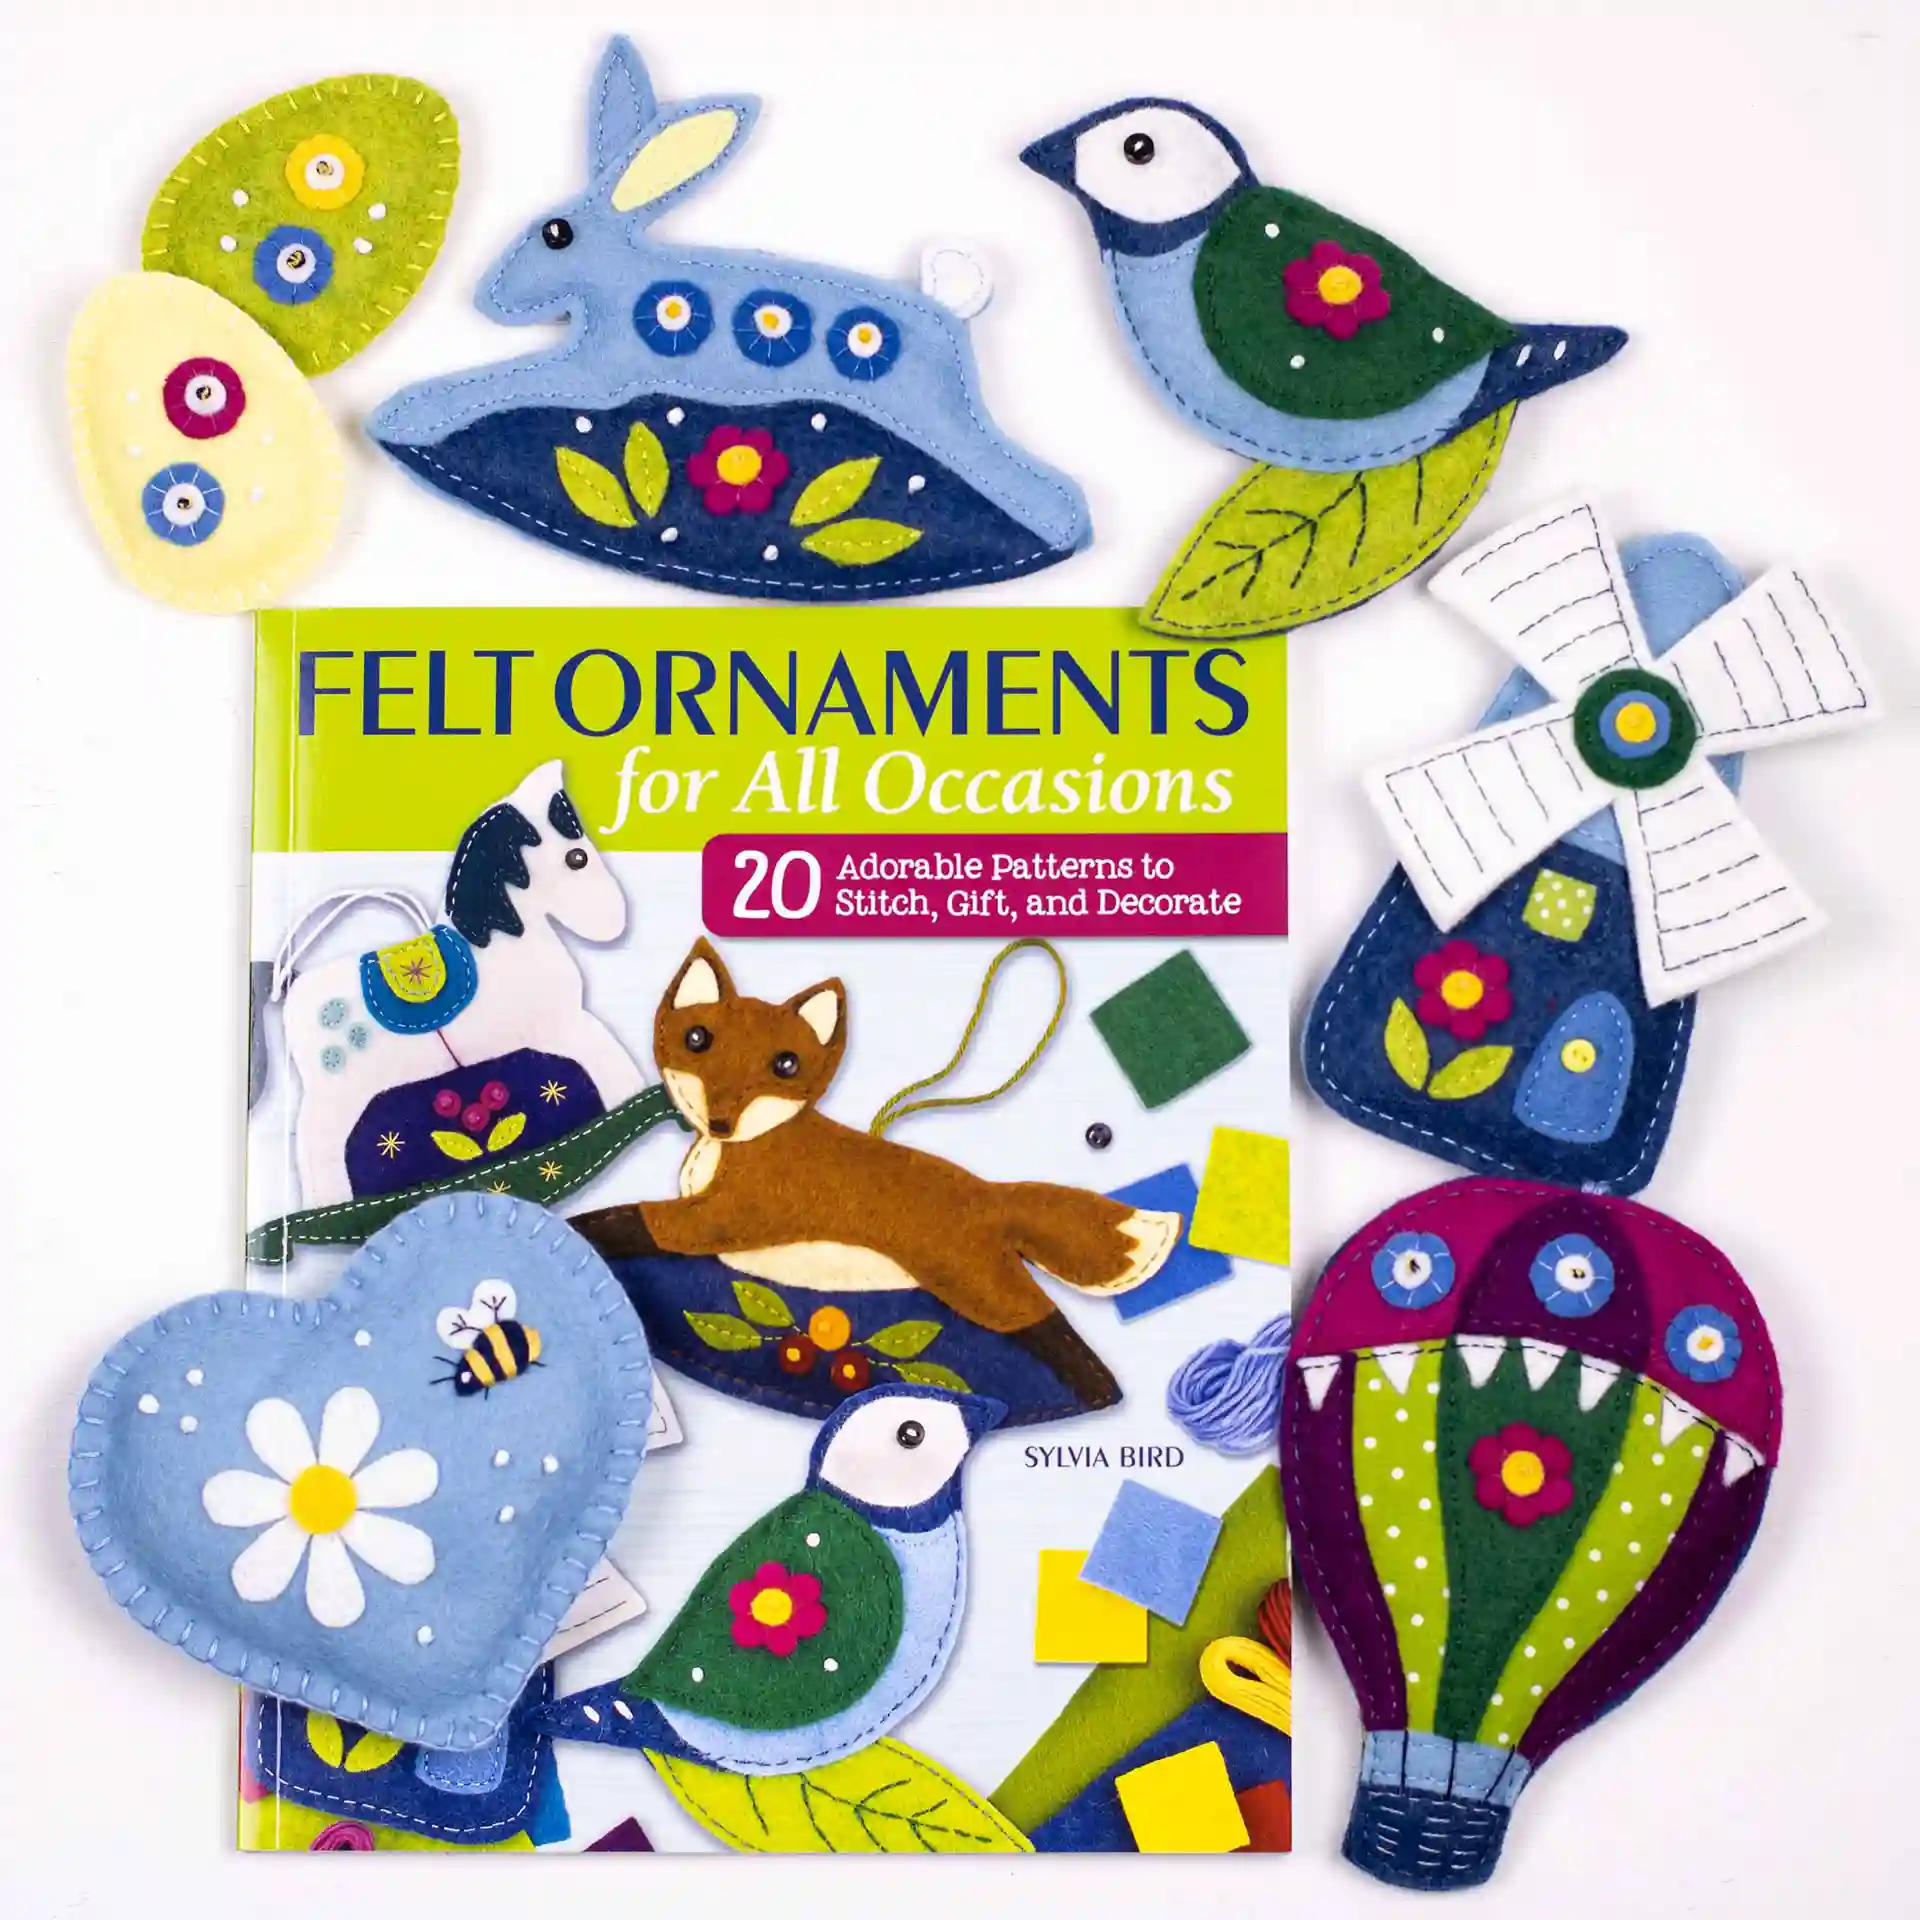 Tilly & Puffin's book, Felt Ornaments for all occasions, with ornaments from the Spring chapter